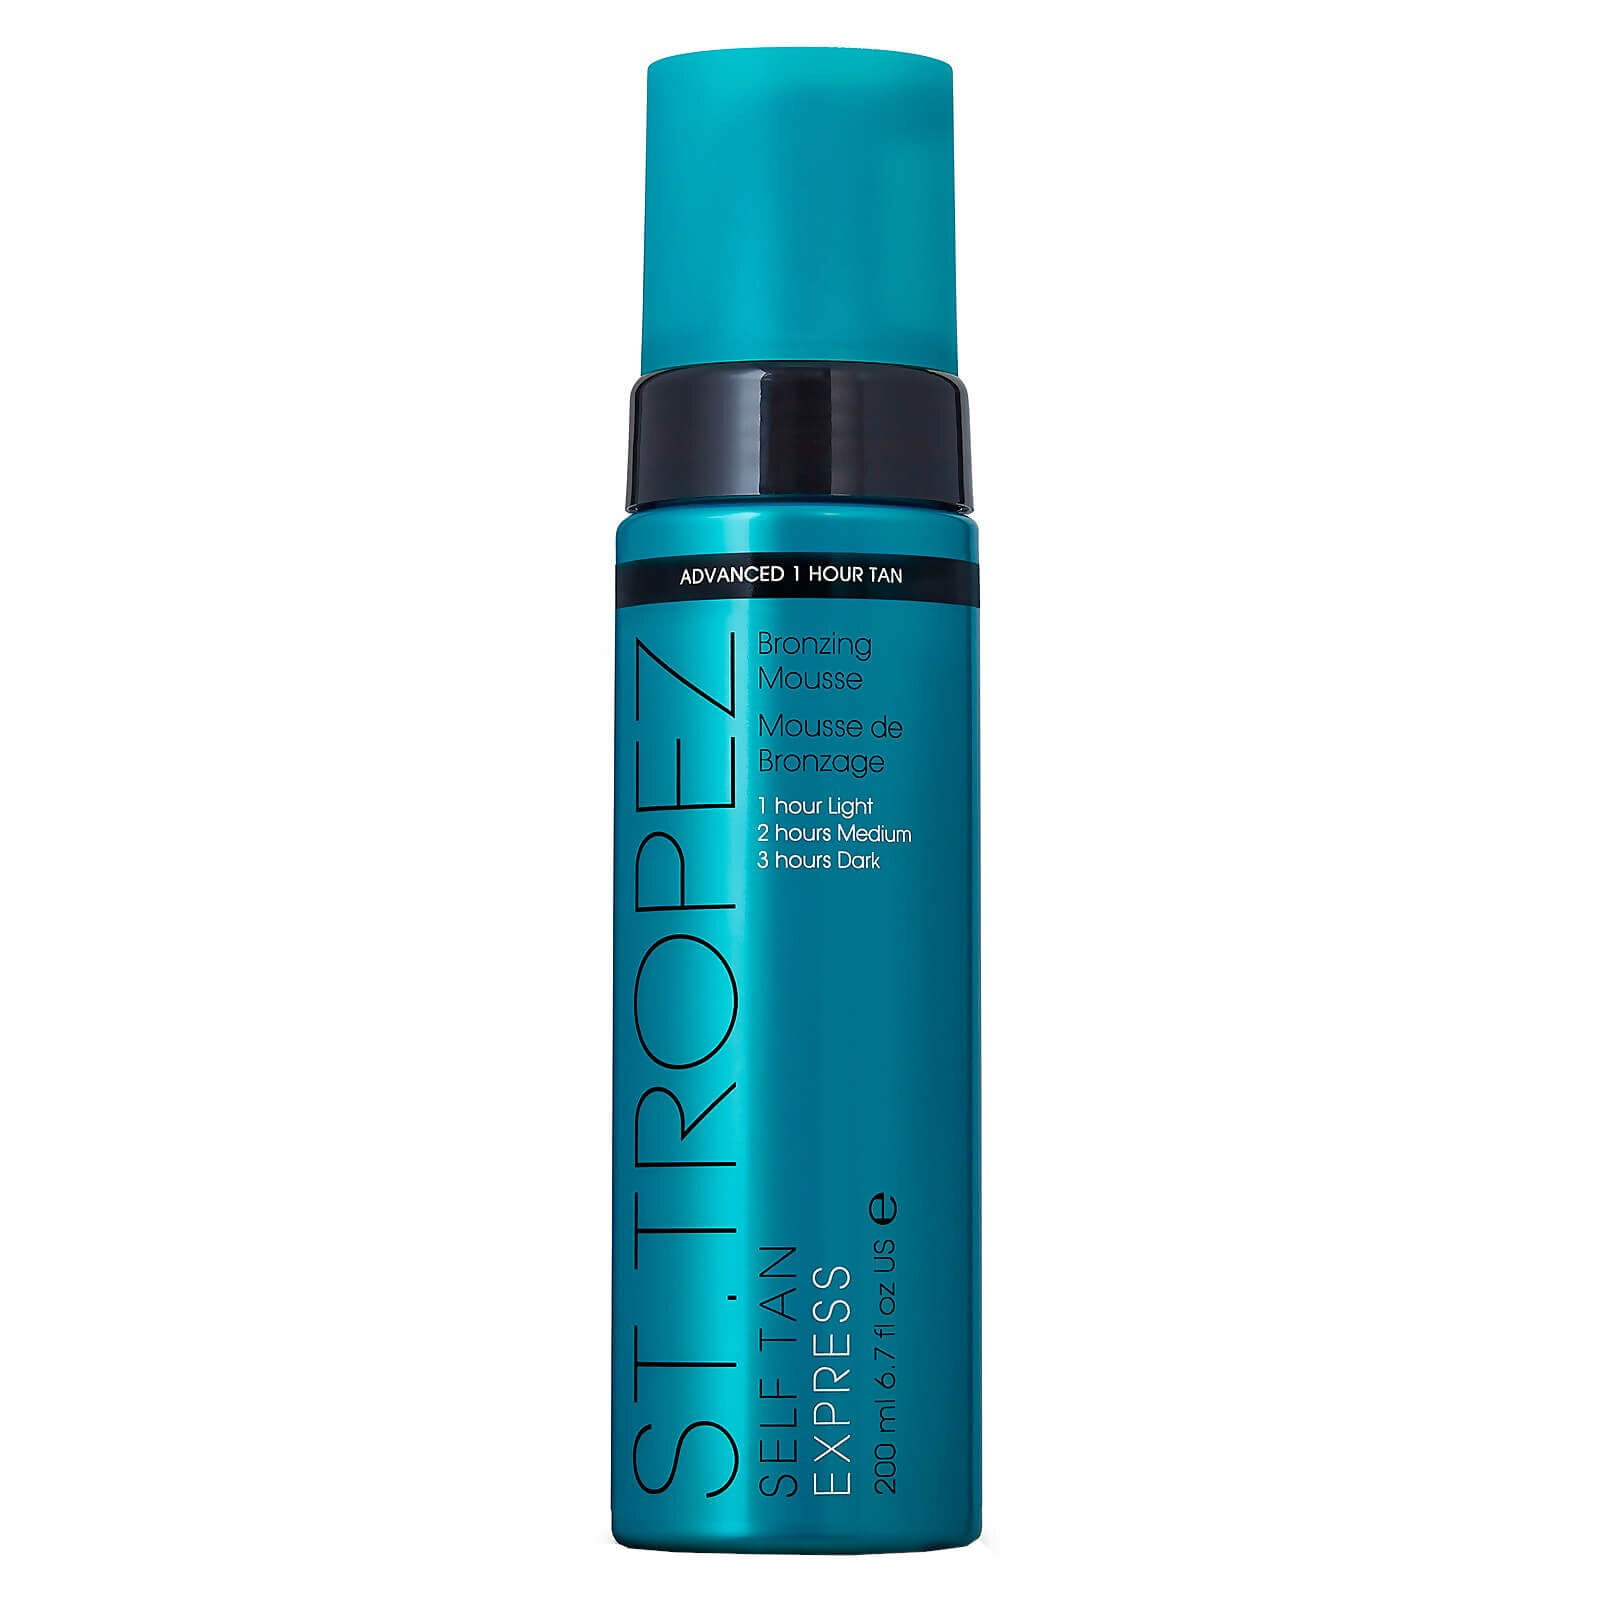 St. Tropez Self Tan Express, $18 for 1.7oz at Nordstrom 